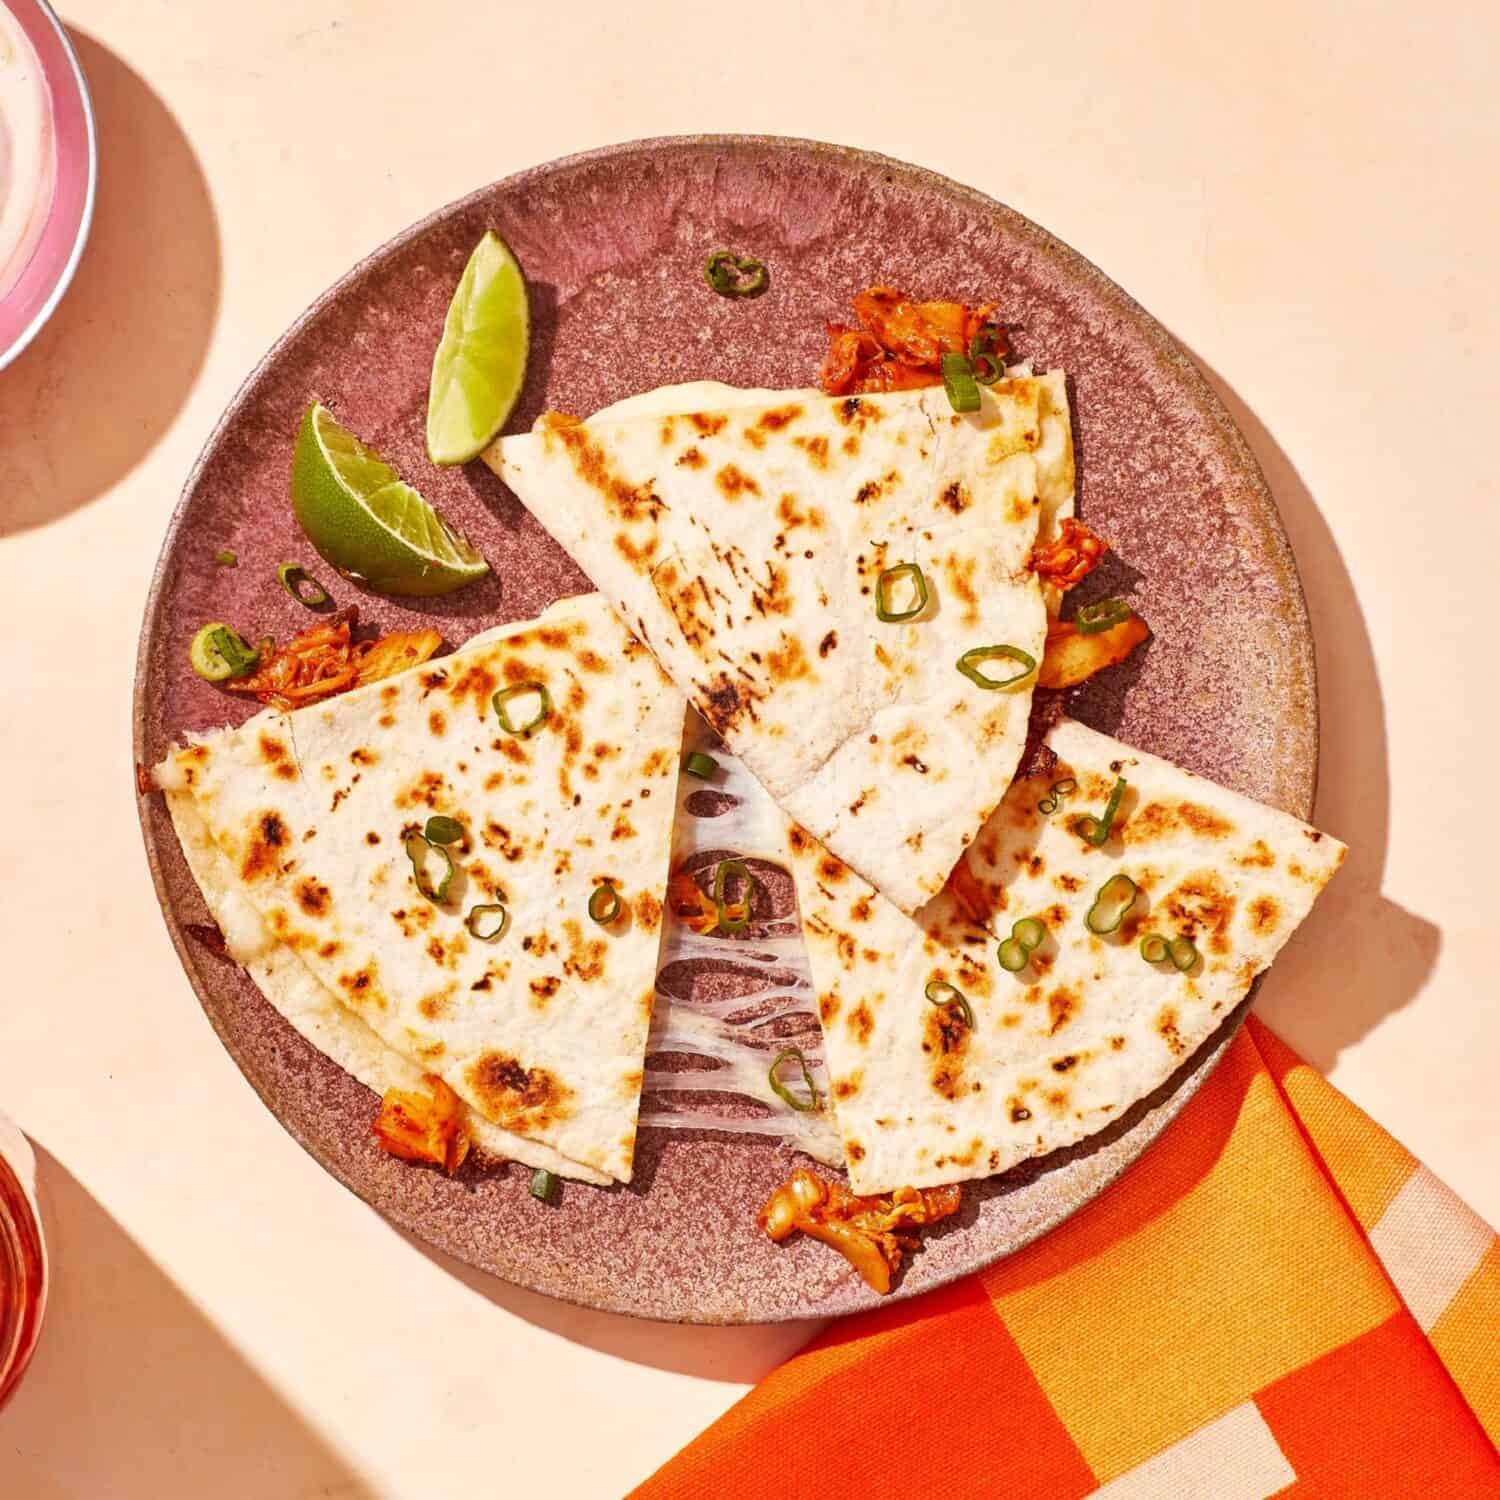 Kimchi Quesadillas served on a plate